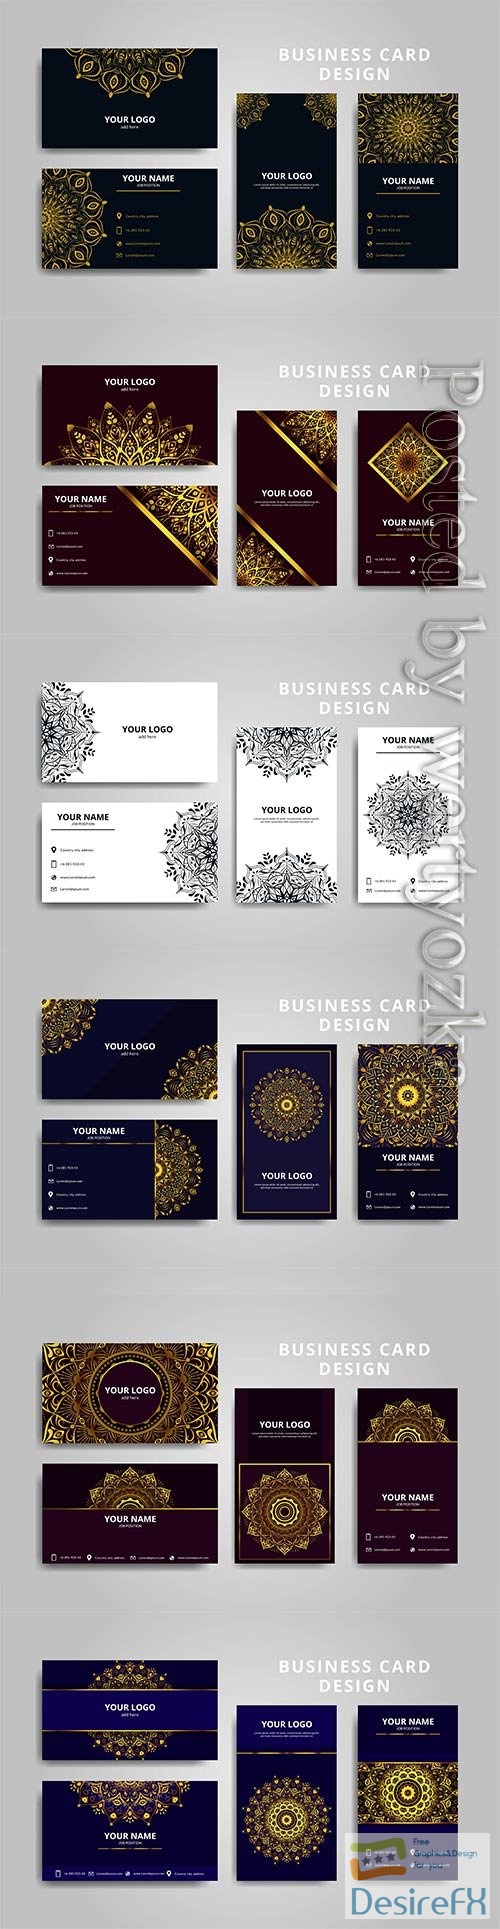 Luxurious gold and red mandala business card template design